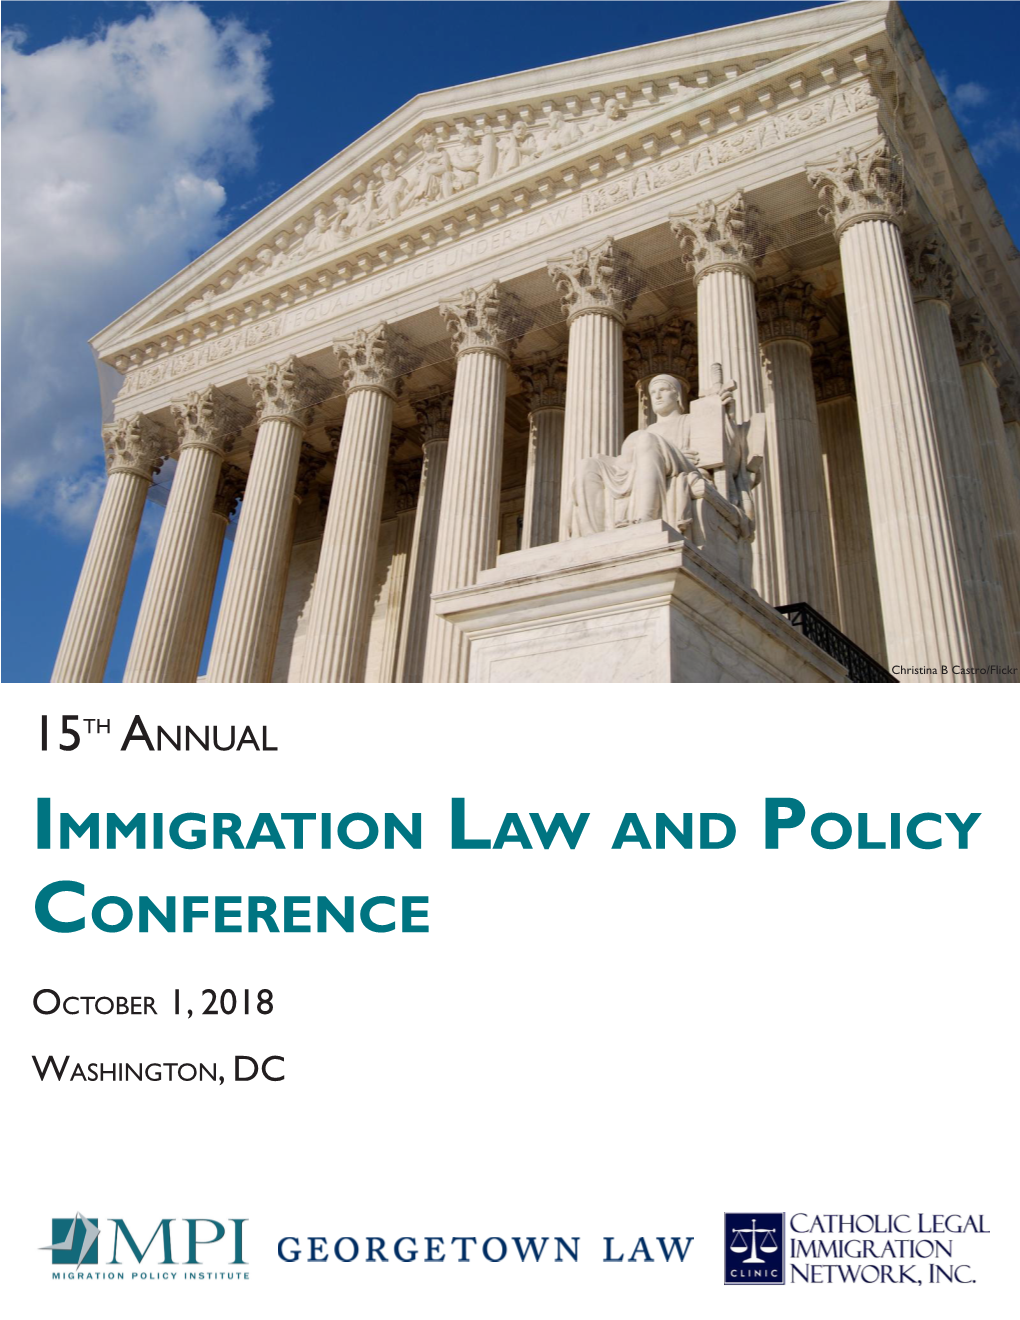 15Th Annual Immigration Law and Policy Conference Program